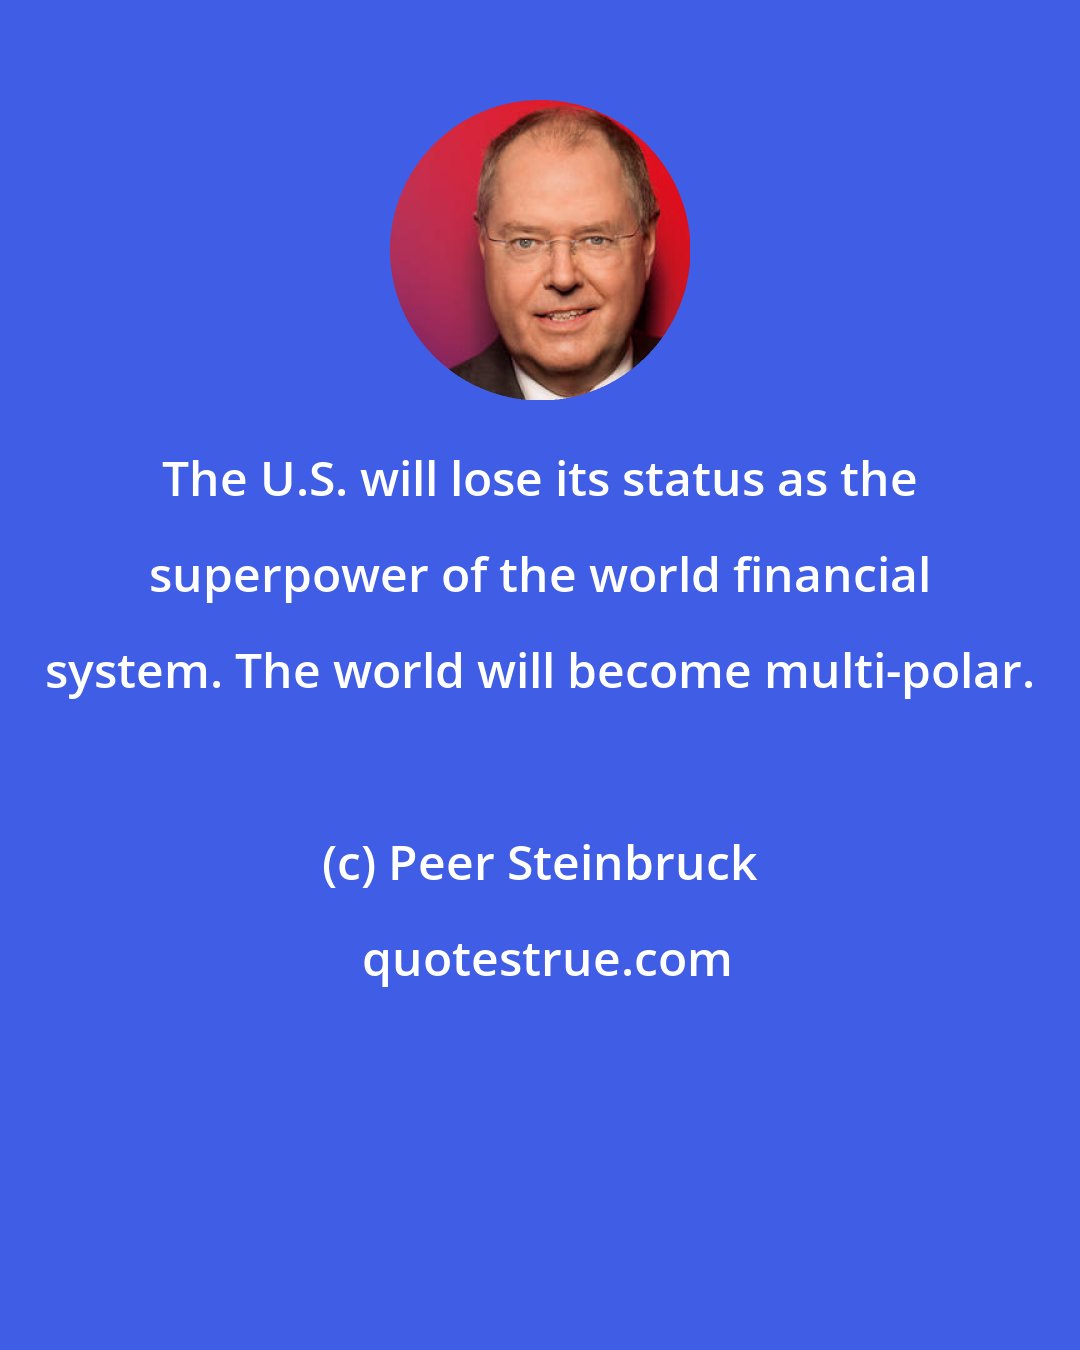 Peer Steinbruck: The U.S. will lose its status as the superpower of the world financial system. The world will become multi-polar.